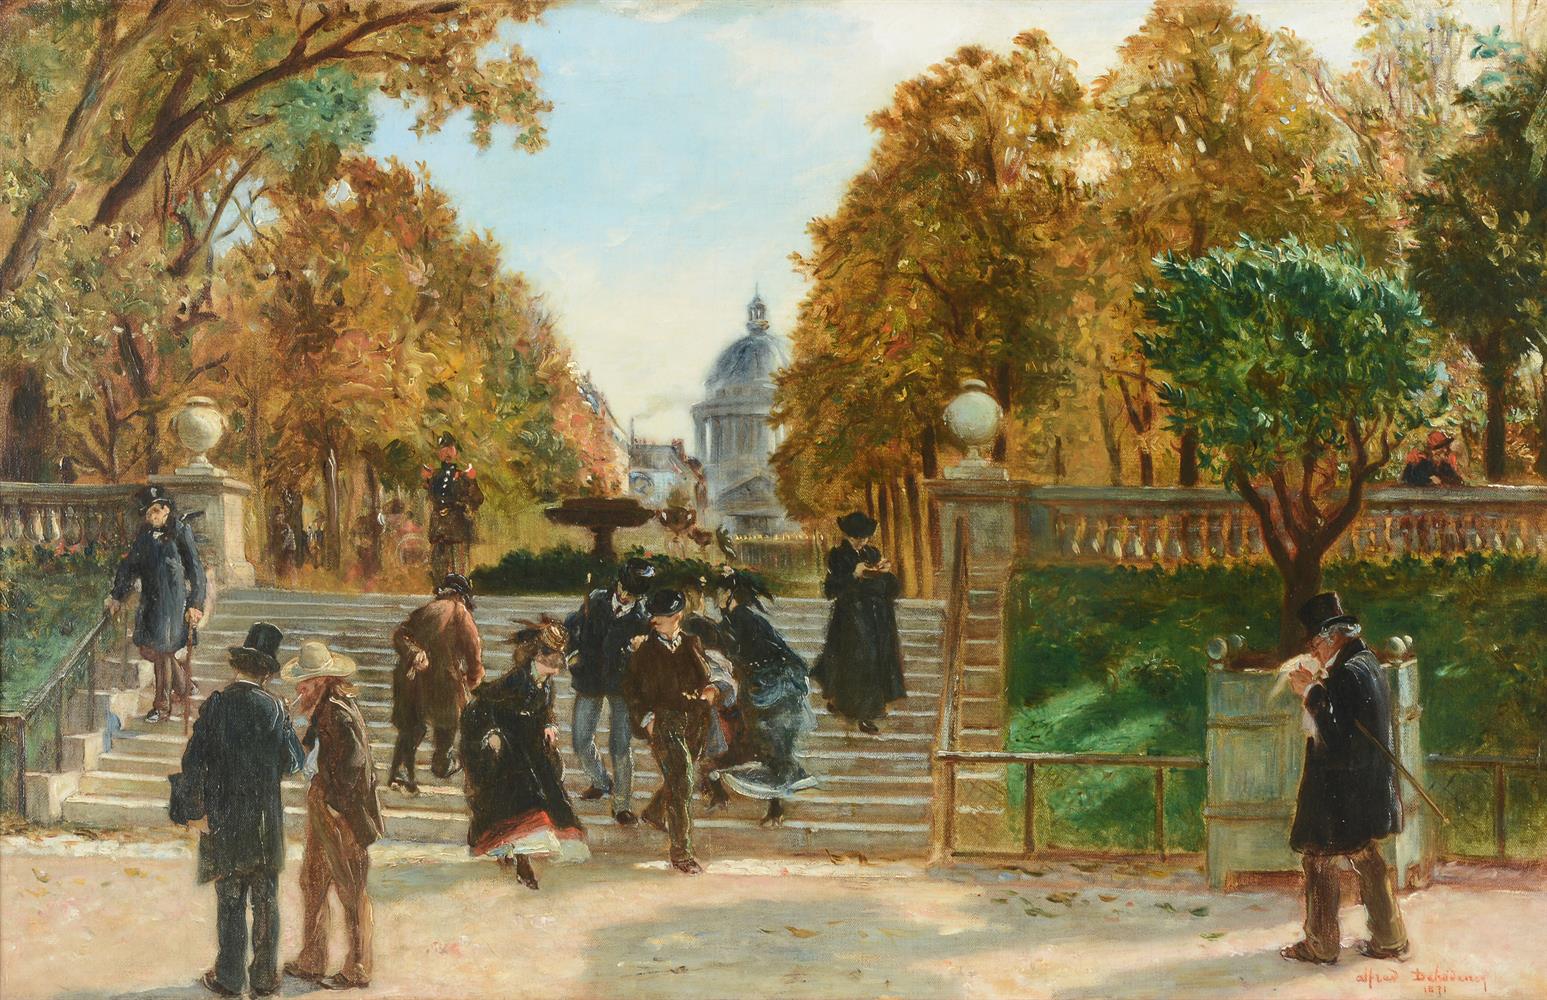 ALFRED DEHODENCQ (FRENCH 1822-1882), FIGURES IN THE JARDIN DU LUXEMBOURG, PARIS